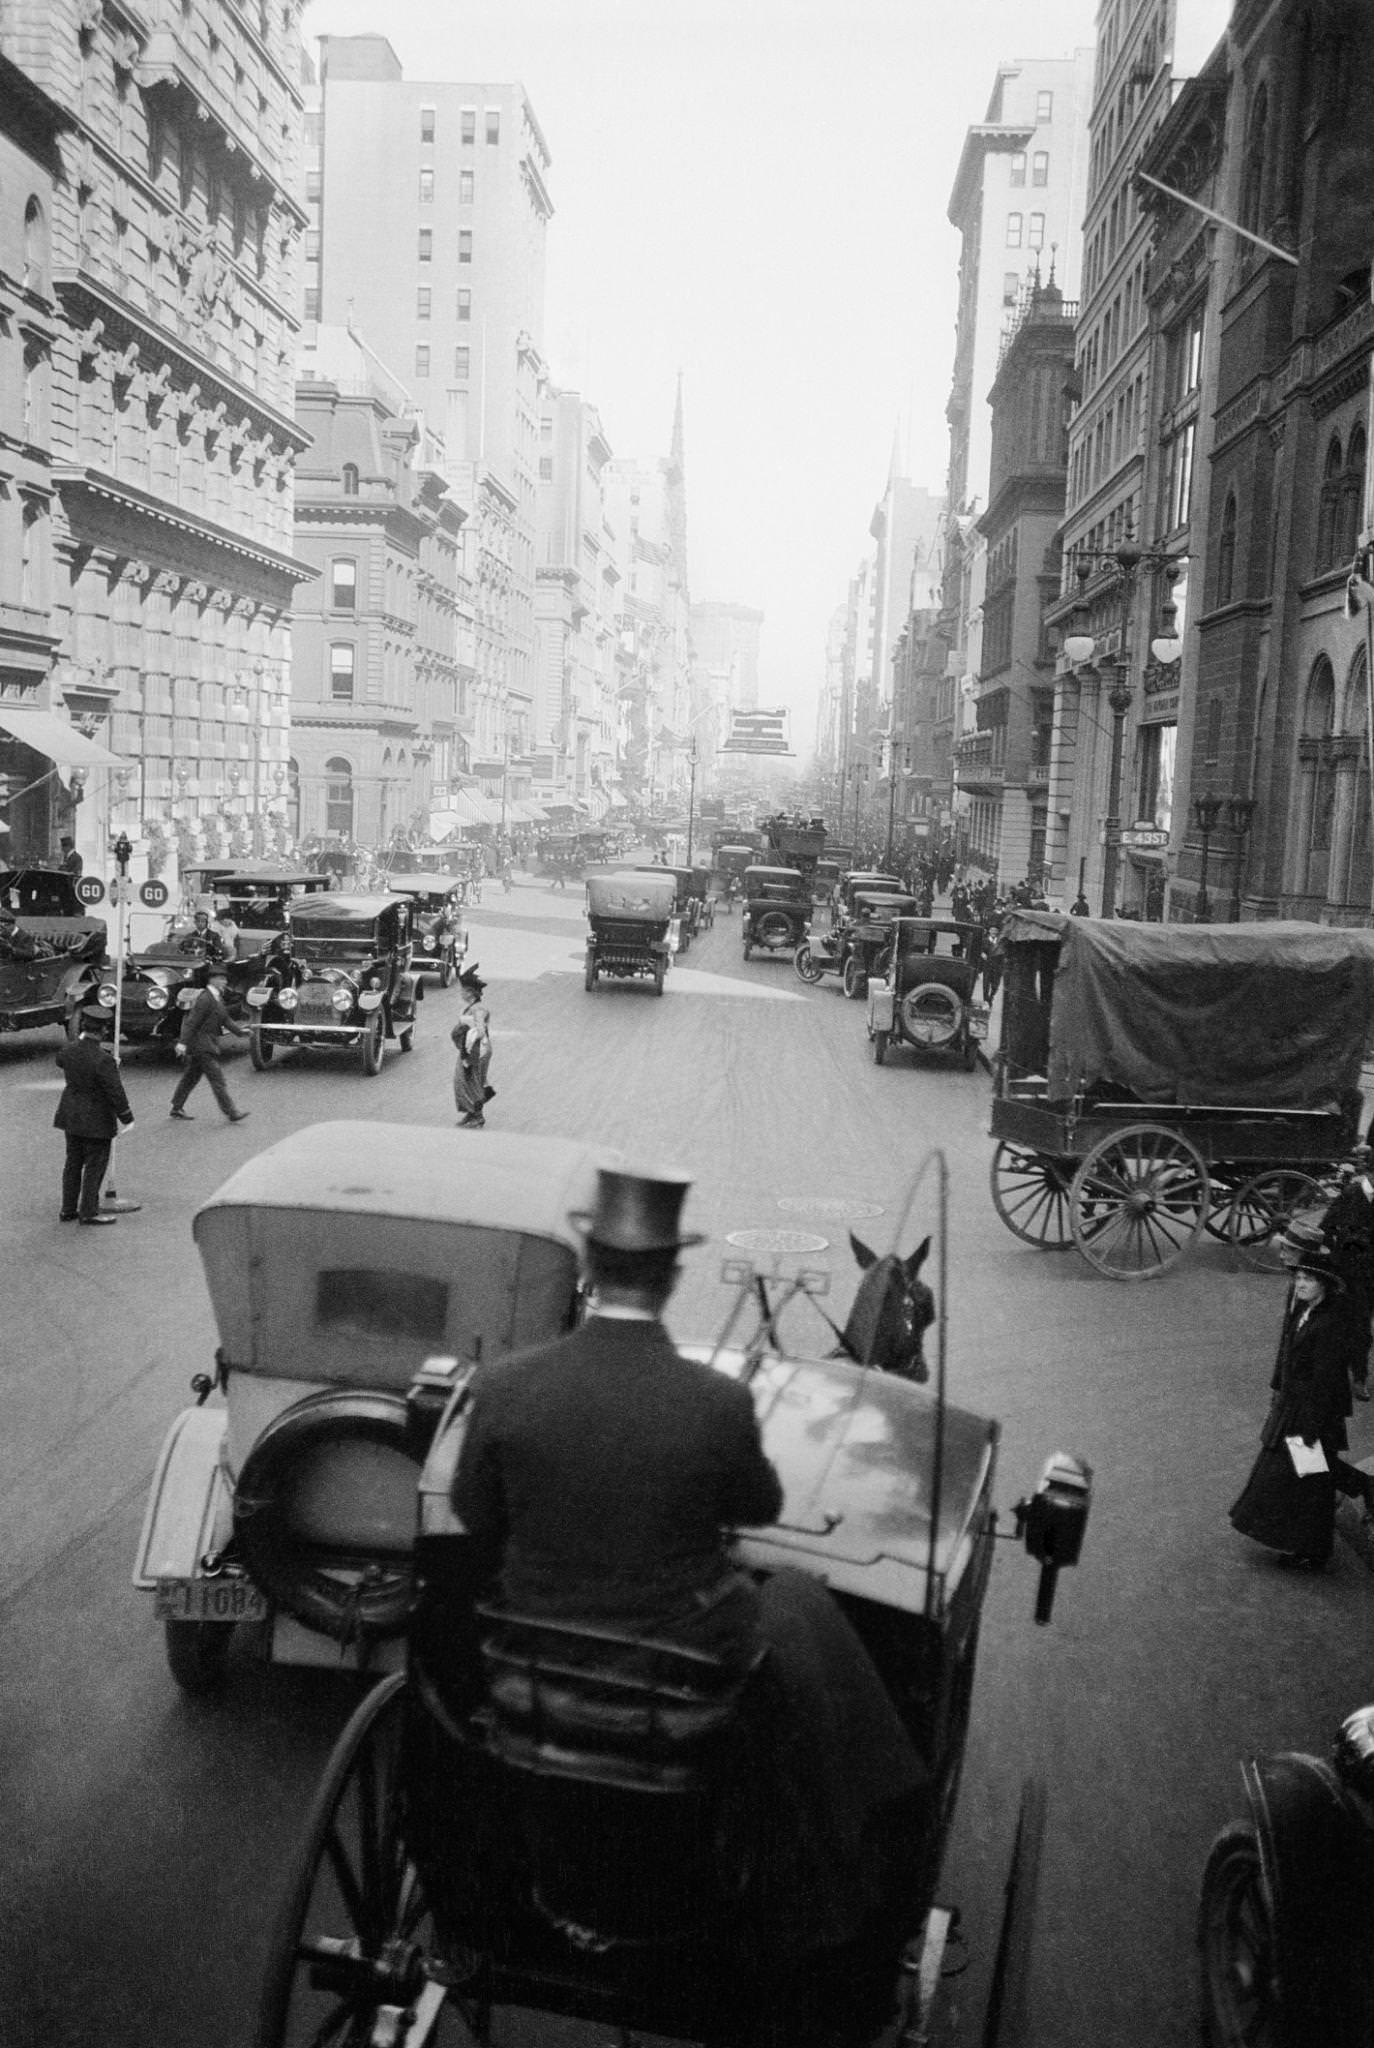 5Th Avenue At 43Rd Looking North, Cars, Wagons, Pedestrians, Hansom Cab, Driver In Top Hat, New York City, 1910S